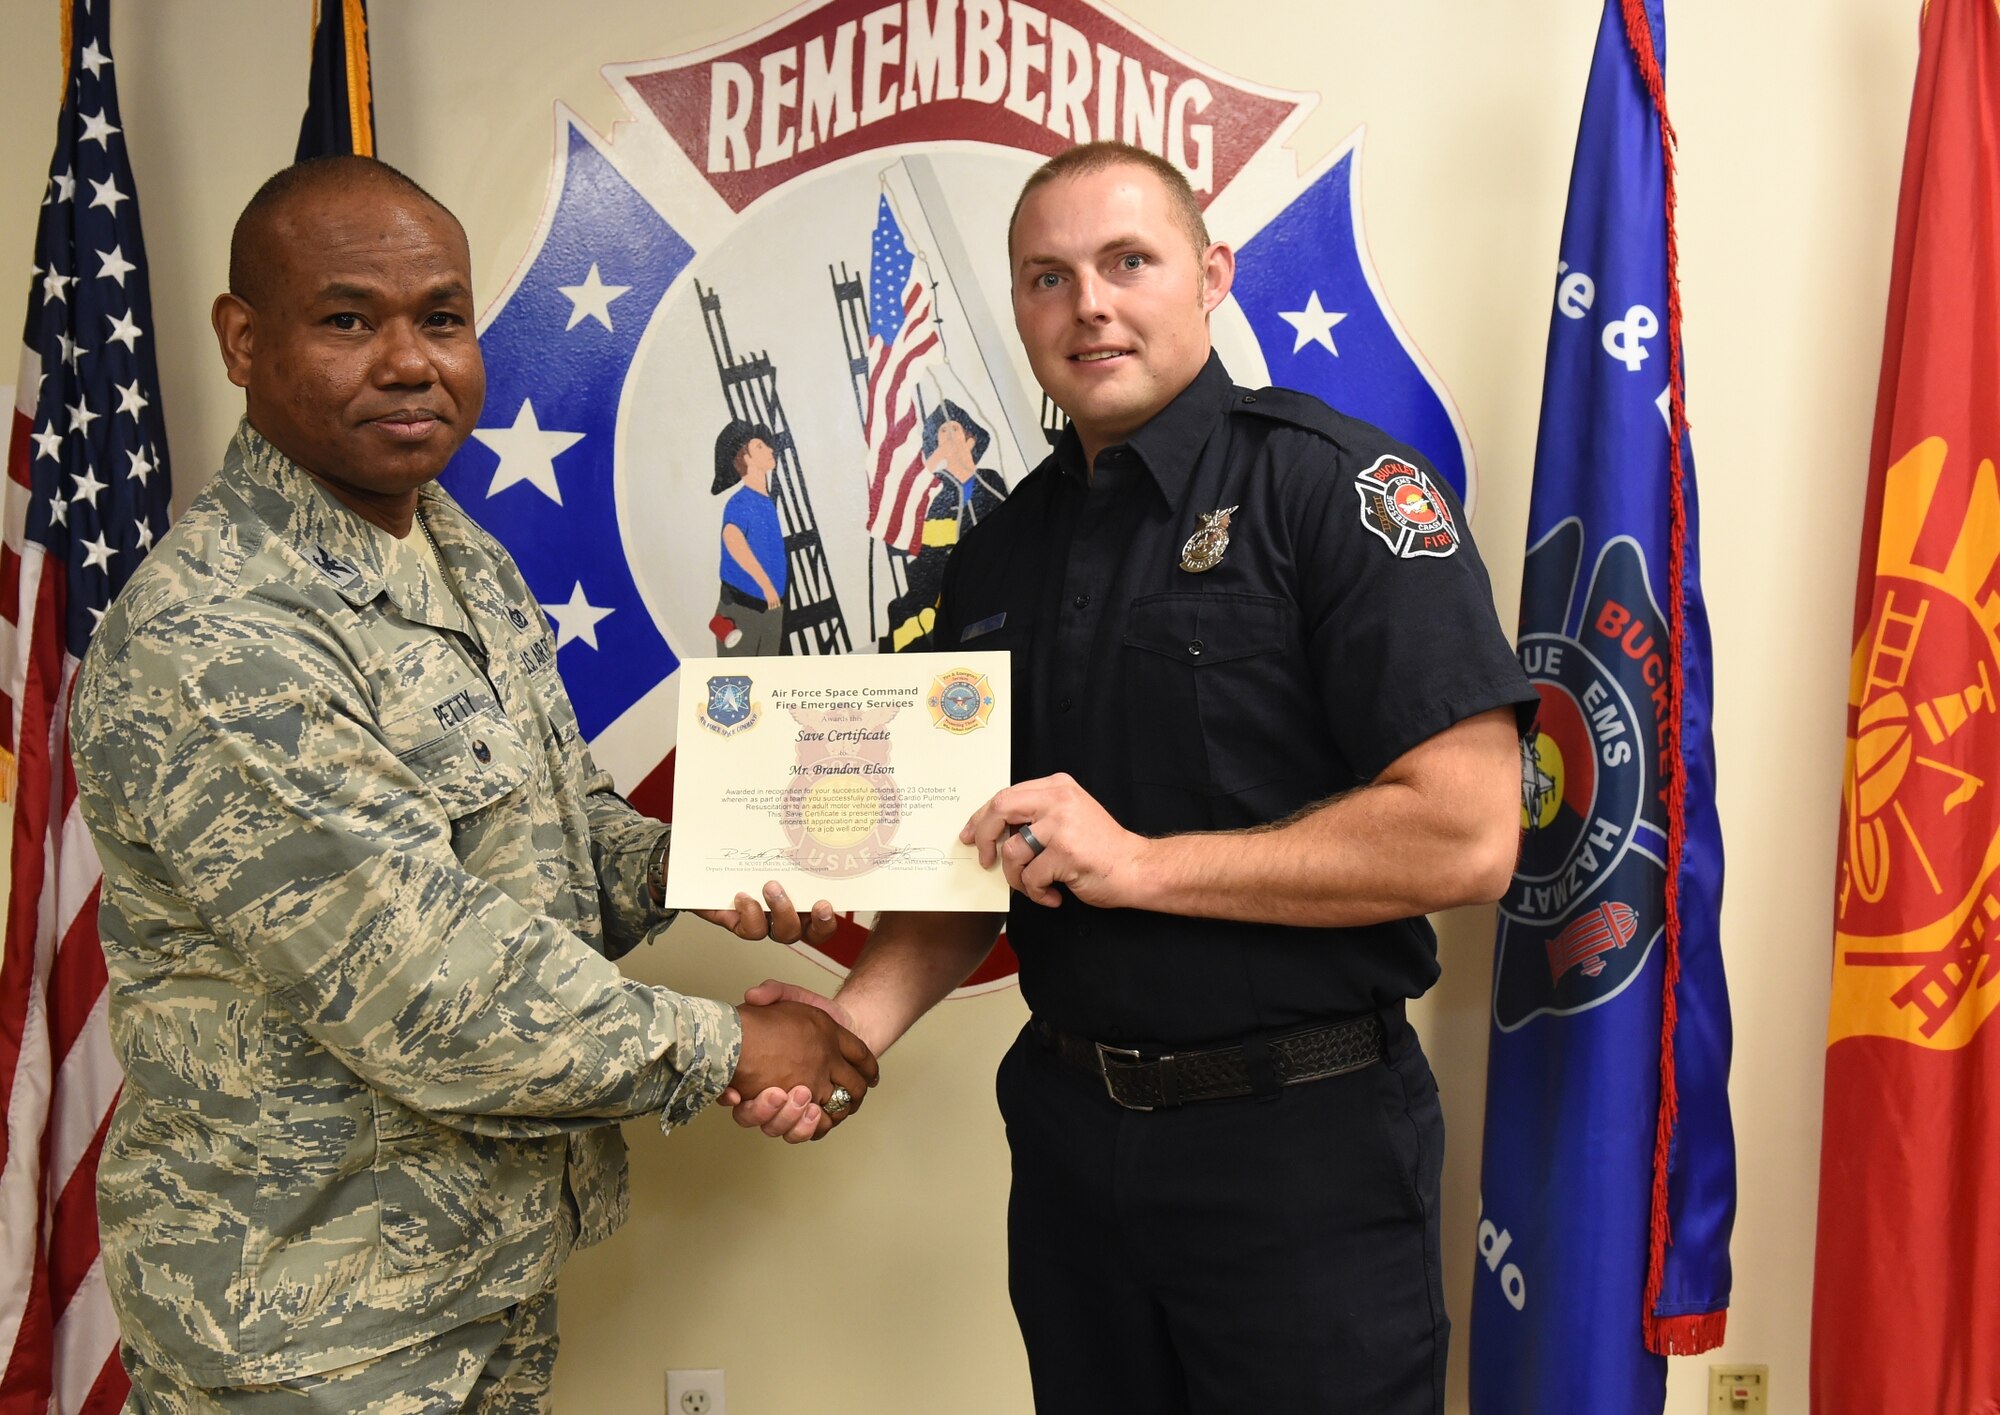 Brandon Elson, Buckley Fire Emergency Services, receives an Air Force Space Command Fire Emergency Services Save Certificate from Col. George Petty, AFSPC Civil Engineer Readiness and Emergency Management chief, Nov. 20, 2014, at the fire department on Buckley Air Force Base, Colo. Elson and three other firefighters were awarded for their lifesaving actions while responding to a major vehicle accident in October 2014. (U.S. Air Force photo by Tech. Sgt. Kali L. Gradishar/Released)